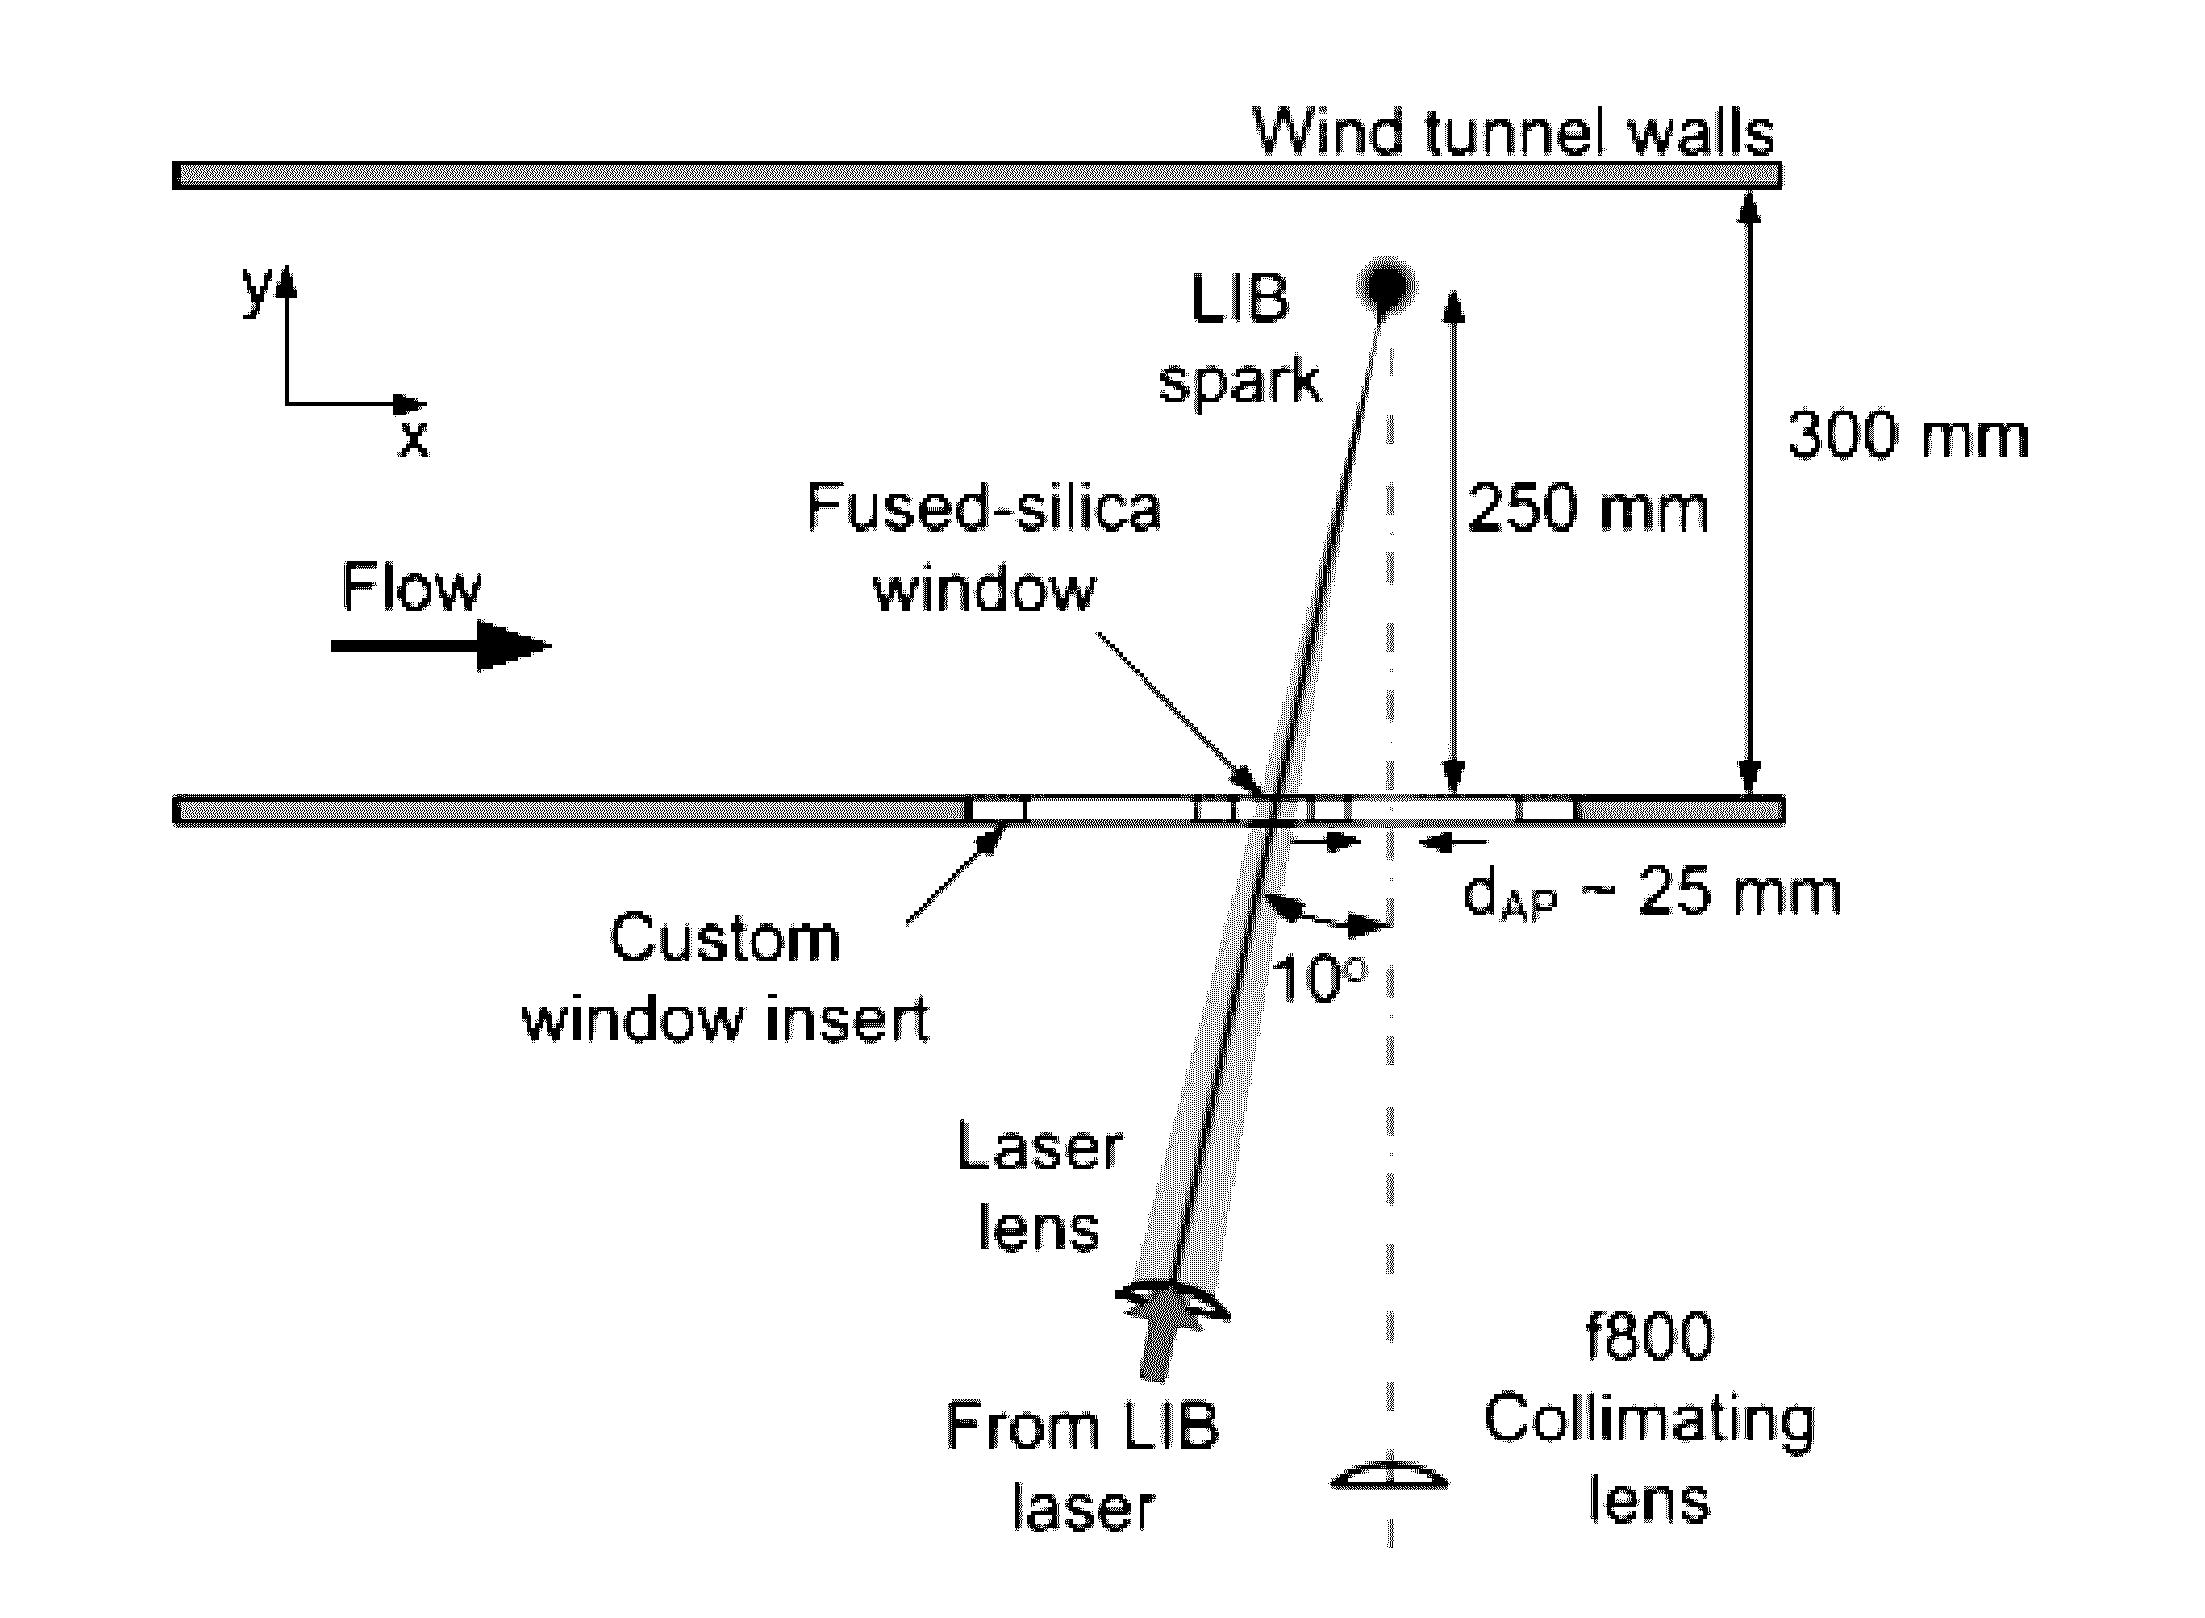 Apparatus and method for non-intrusive off-body measurements in hypersonic flight experiments